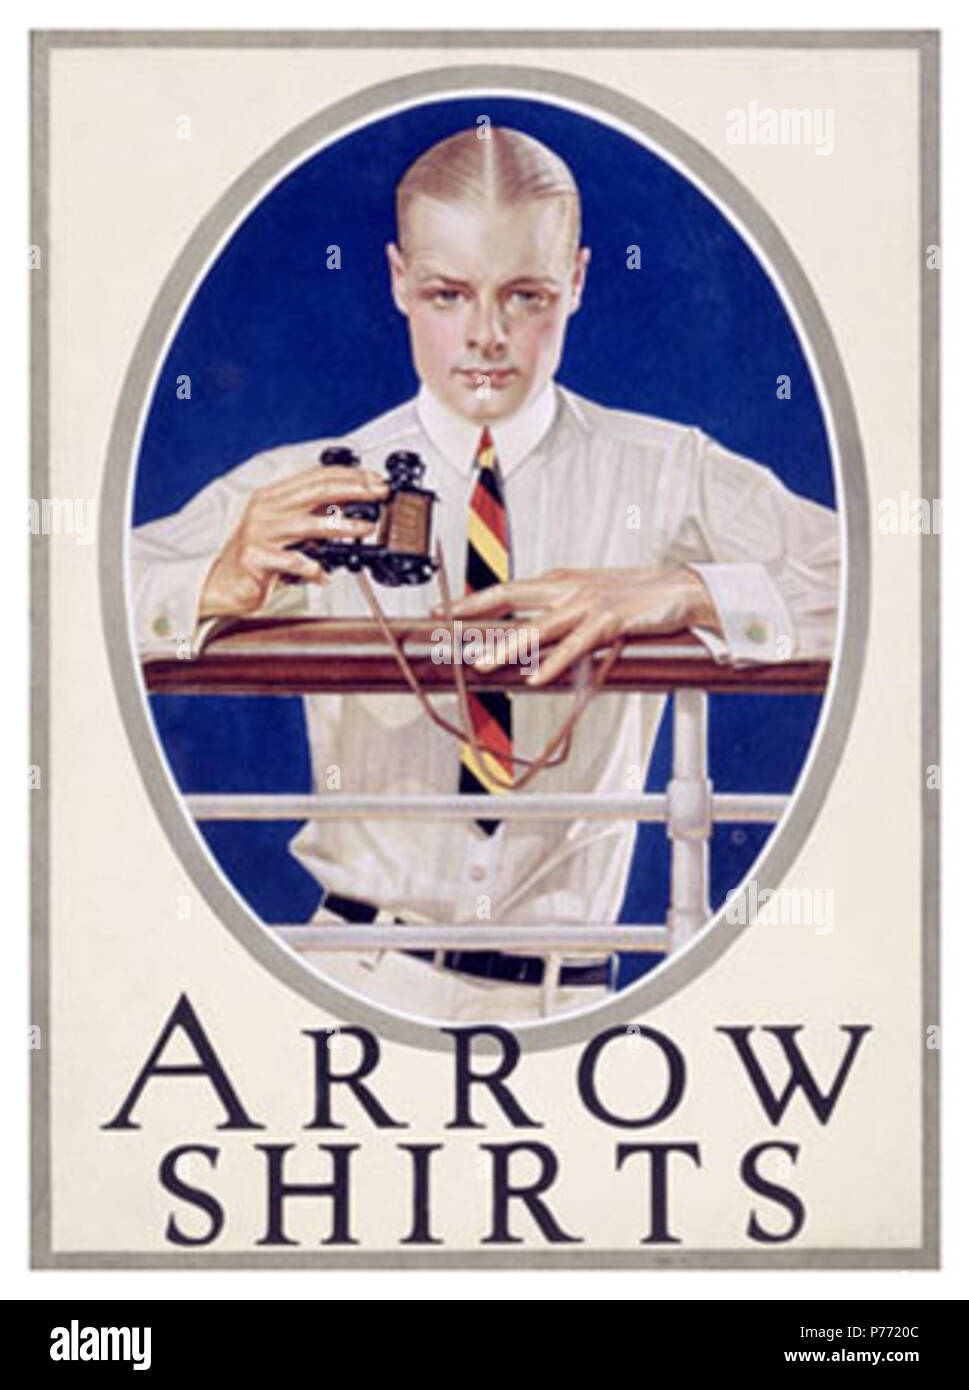 recruit Upset Be satisfied Arrow Shirts advertisement, United States . early 1920s 1 Arrow shirt 1920s  Stock Photo - Alamy